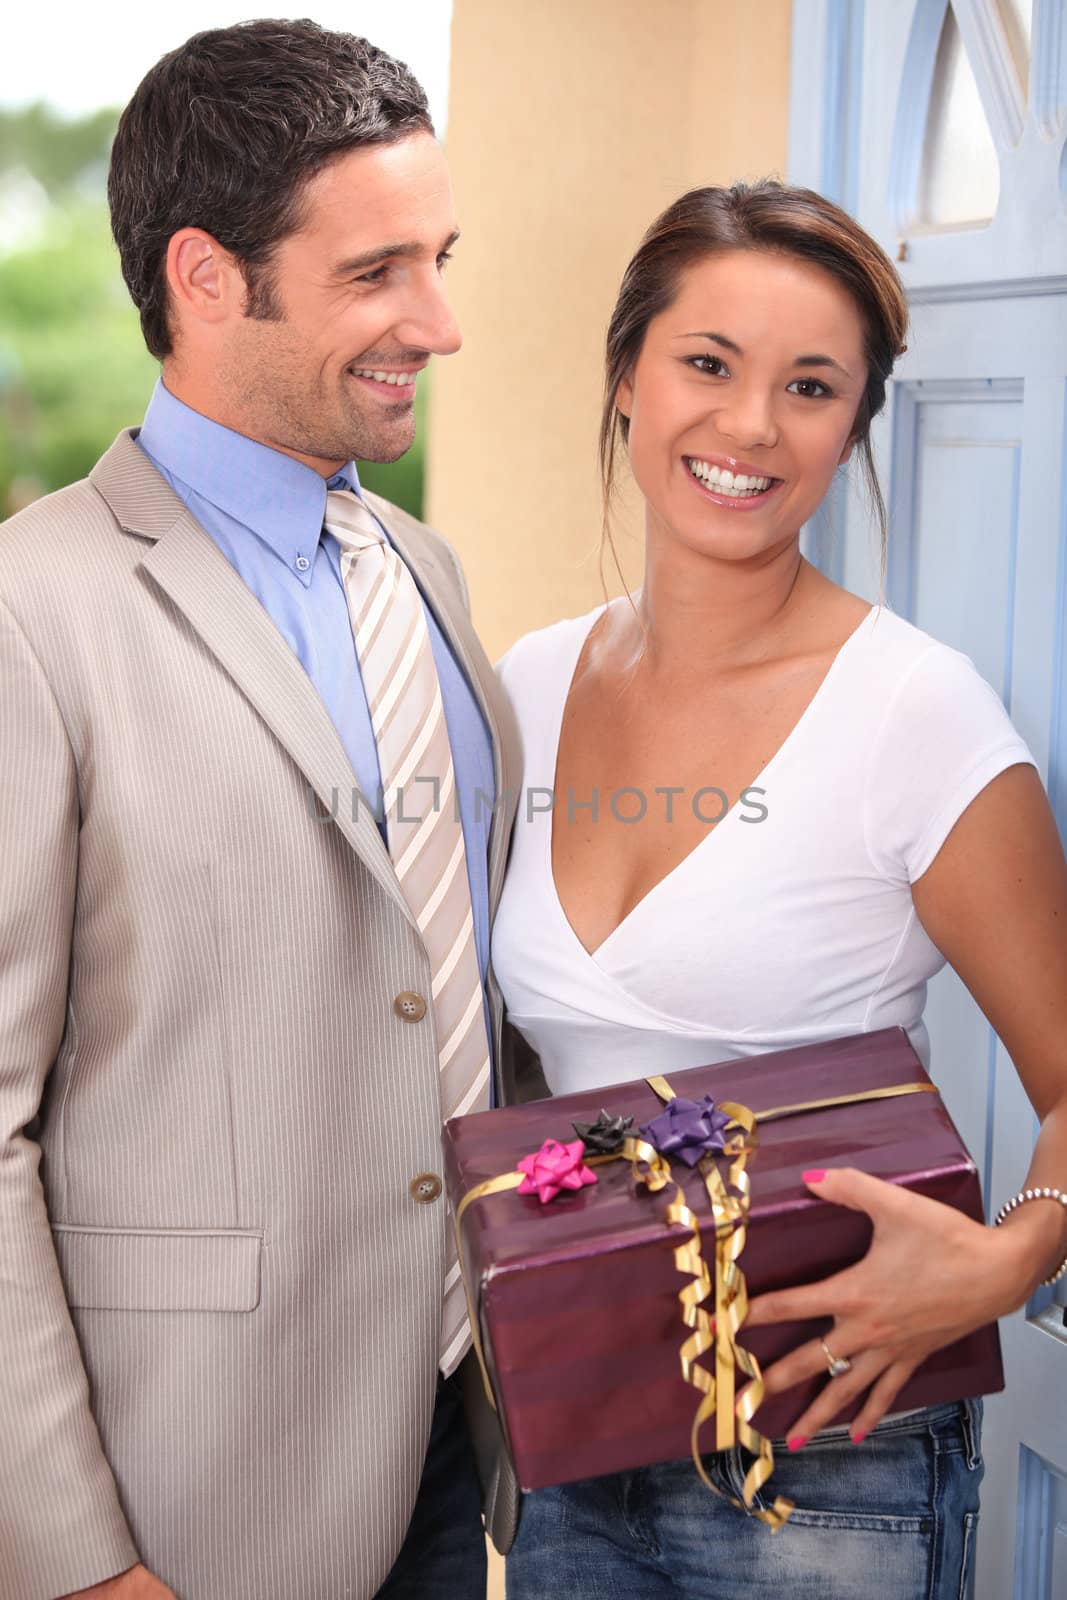 a beautiful woman received a gift from a well dressed man by phovoir